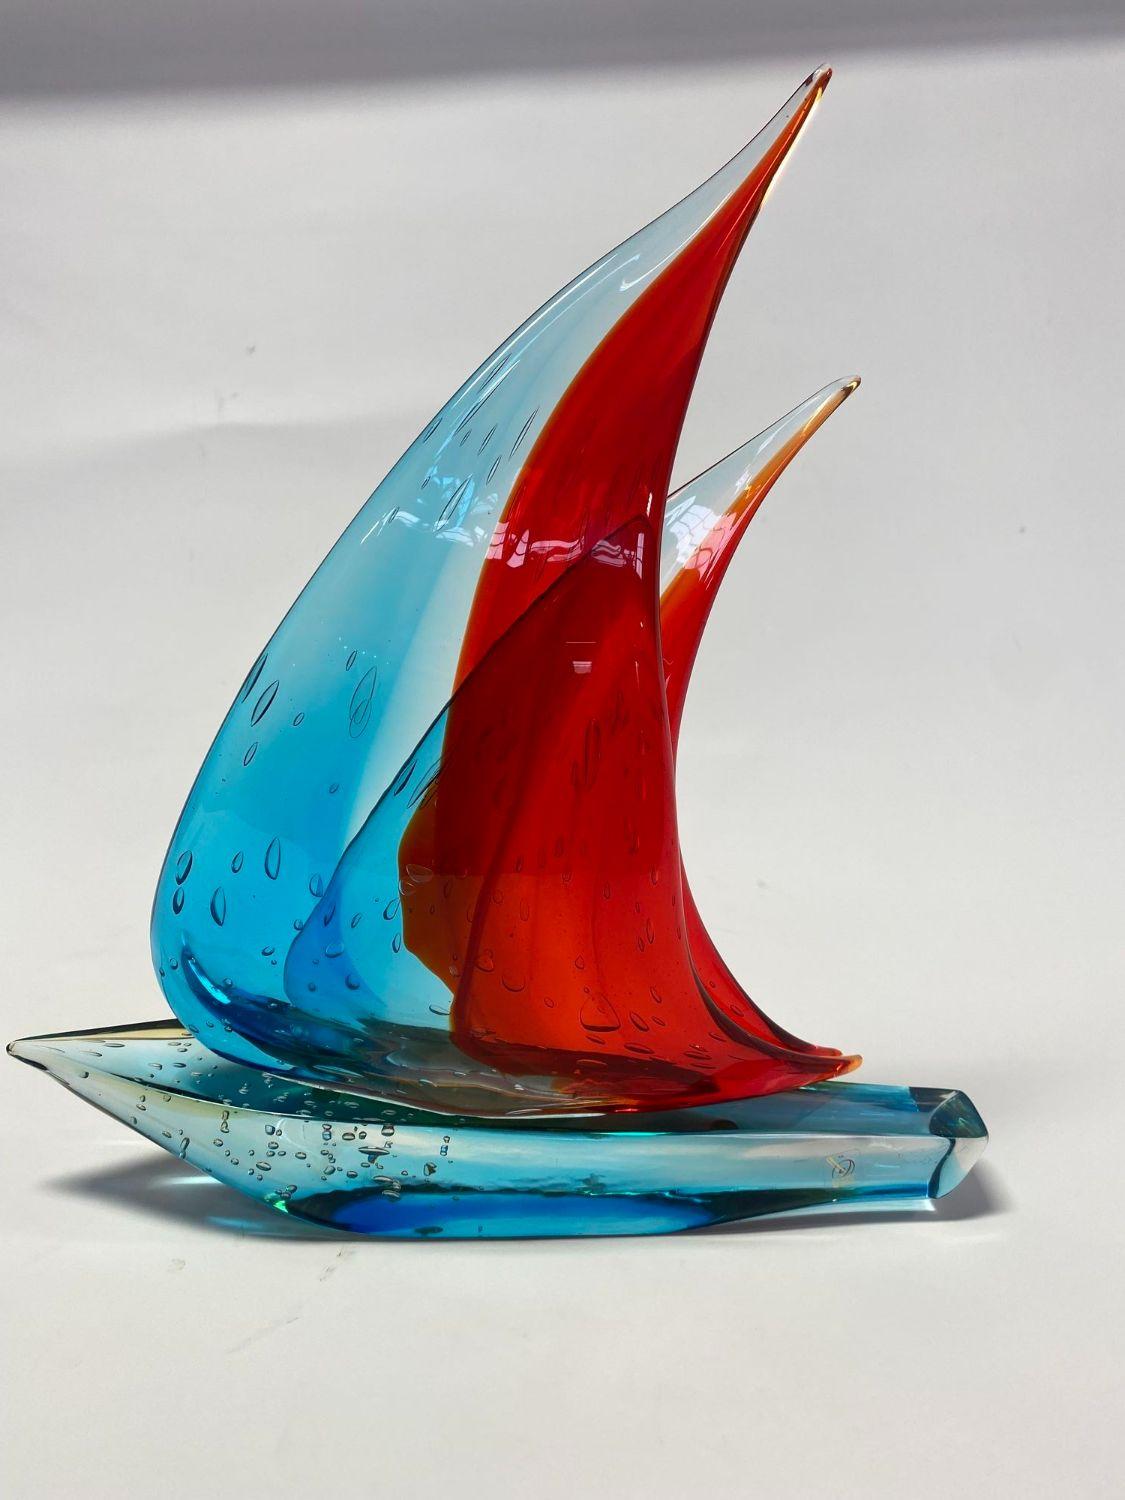 Vintage Italian double sail boat hand blown and crafted in blue and red Murano glass by Sergio Costantini Signed on the base / Made in Italy in the 1960’s
Height: 20 inches / Width: 17.5 inches / Depth: 3.5 inches